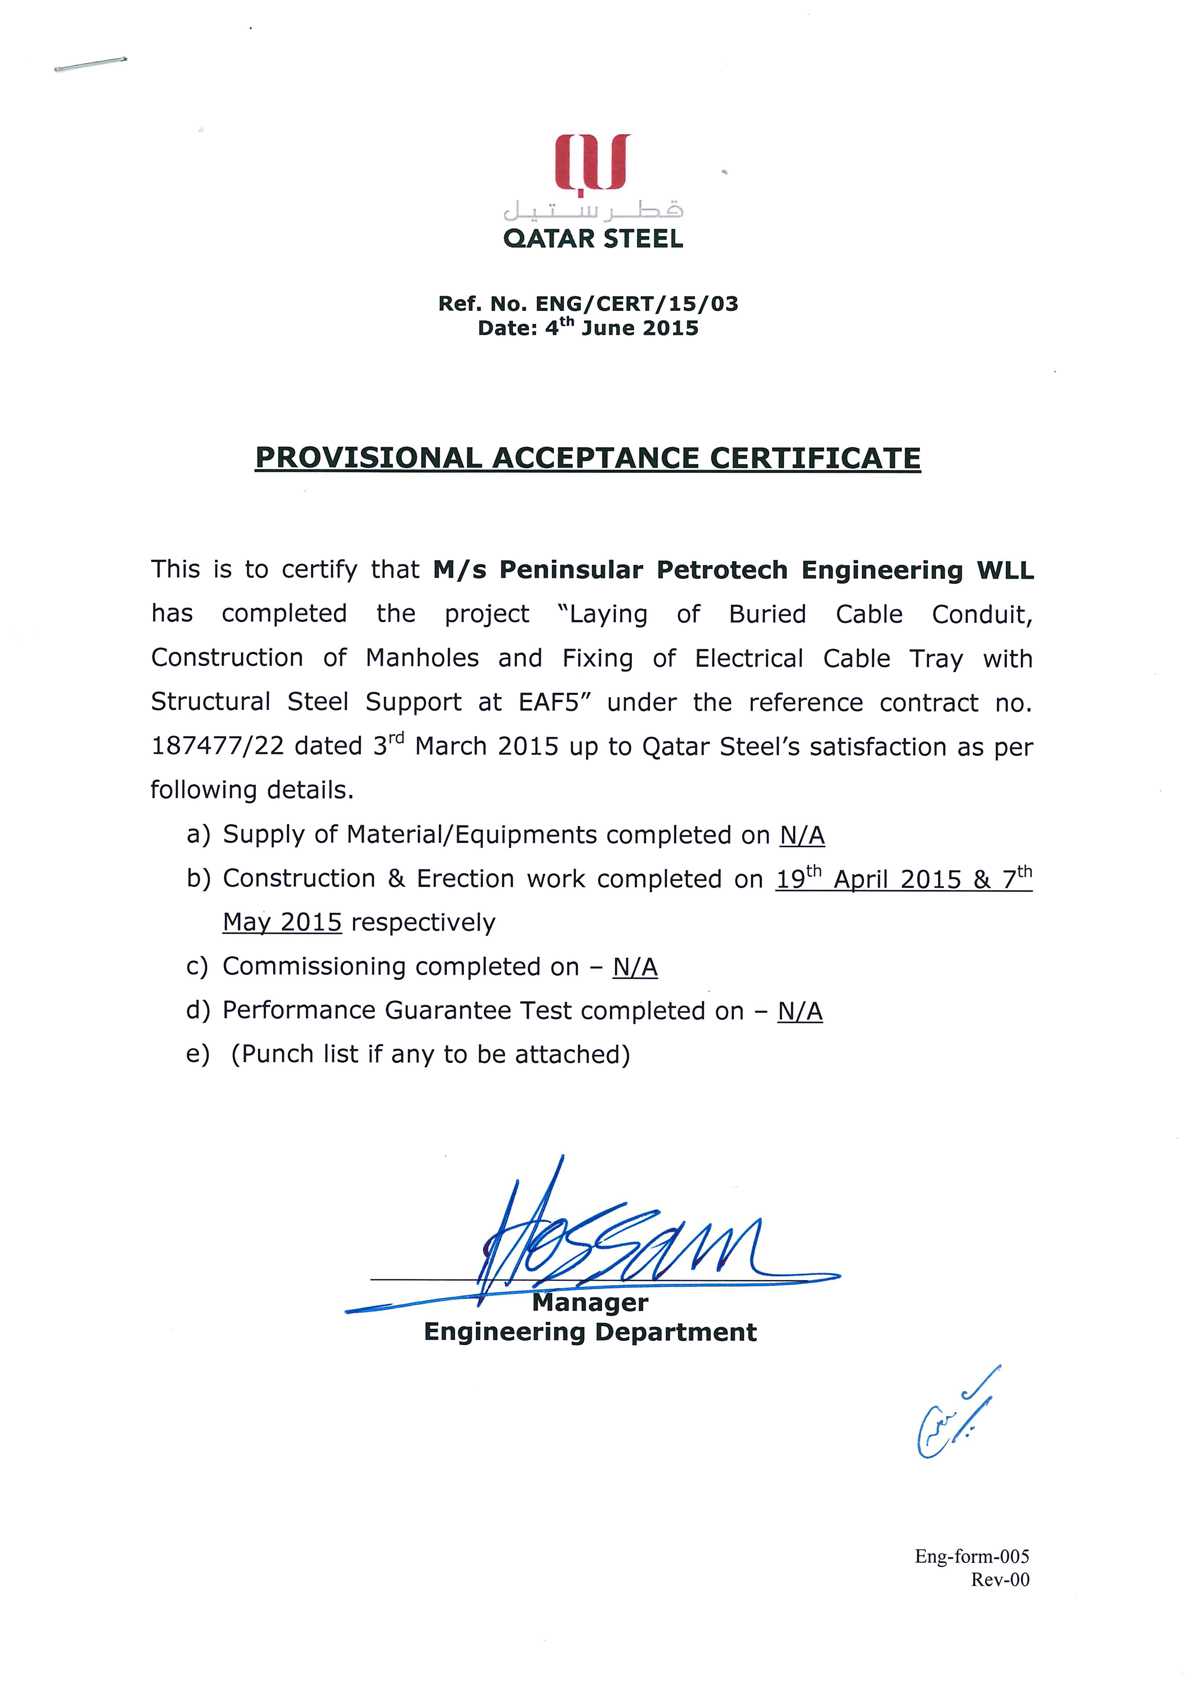 Certification Letter For Project ] – 25 Best Ideas About In Certificate Of Acceptance Template